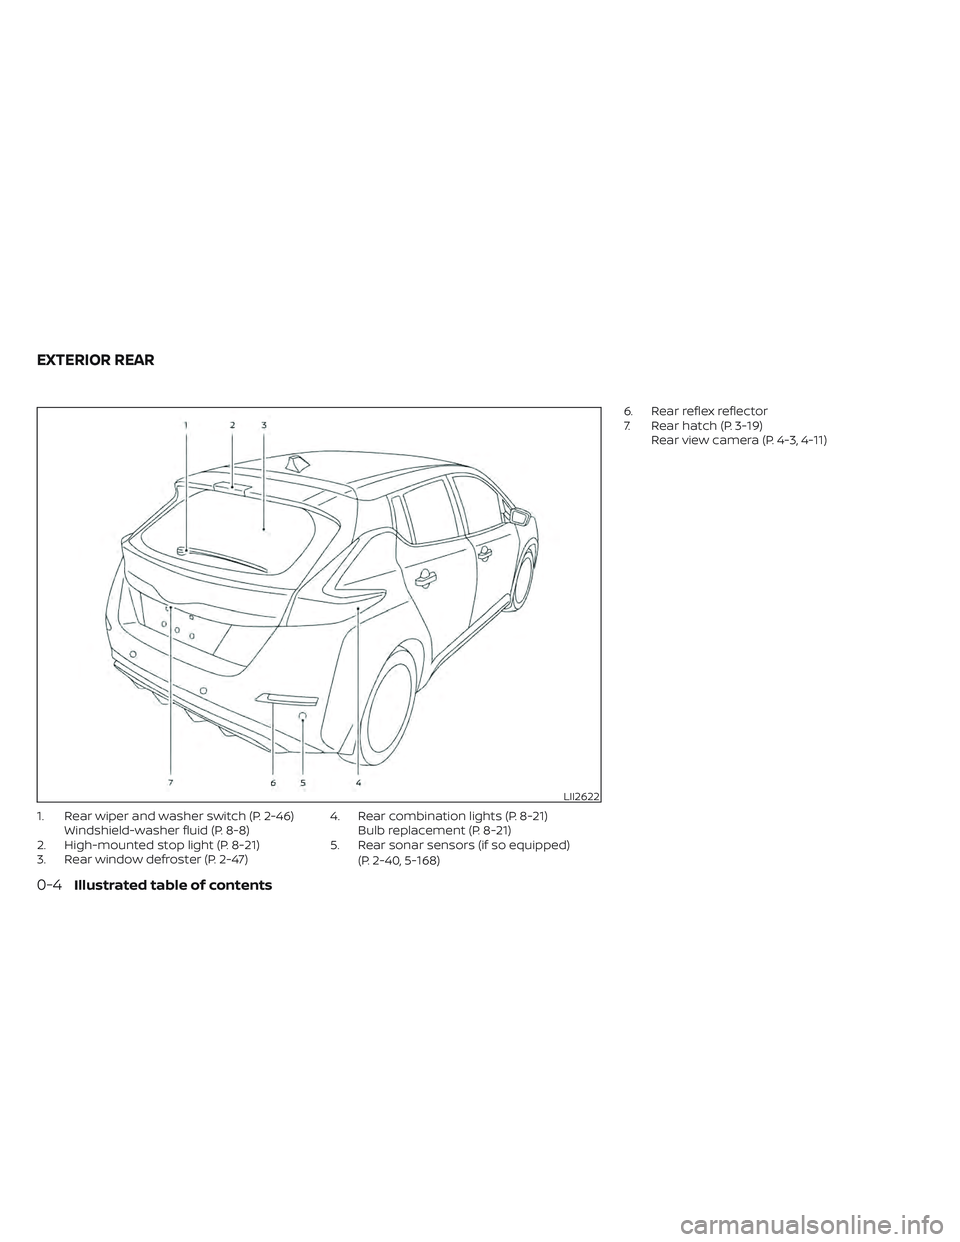 NISSAN LEAF 2022  Owner´s Manual 1. Rear wiper and washer switch (P. 2-46)Windshield-washer fluid (P. 8-8)
2. High-mounted stop light (P. 8-21)
3. Rear window defroster (P. 2-47) 4. Rear combination lights (P. 8-21)
Bulb replacement 